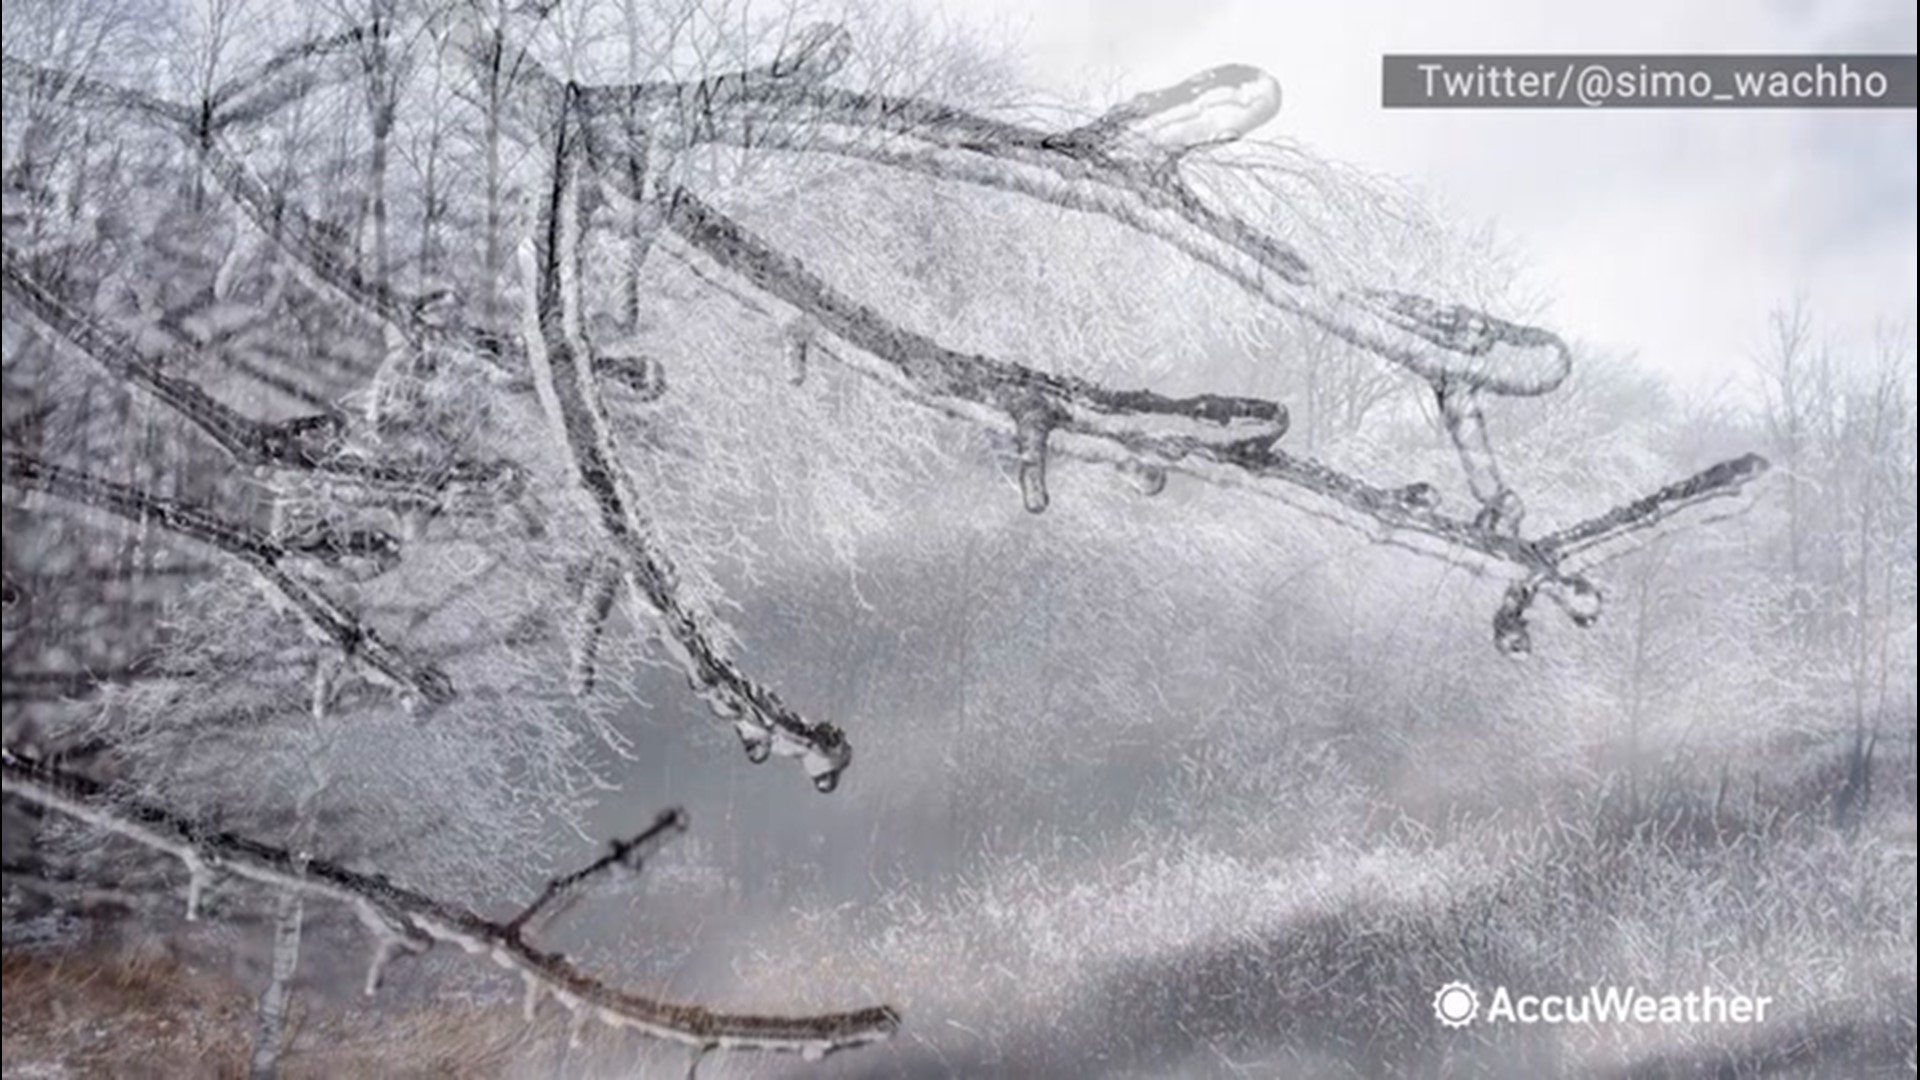 Ice was captured weighing down on trees in Pennsylvania's Pocono Mountains in the early morning of March 24.